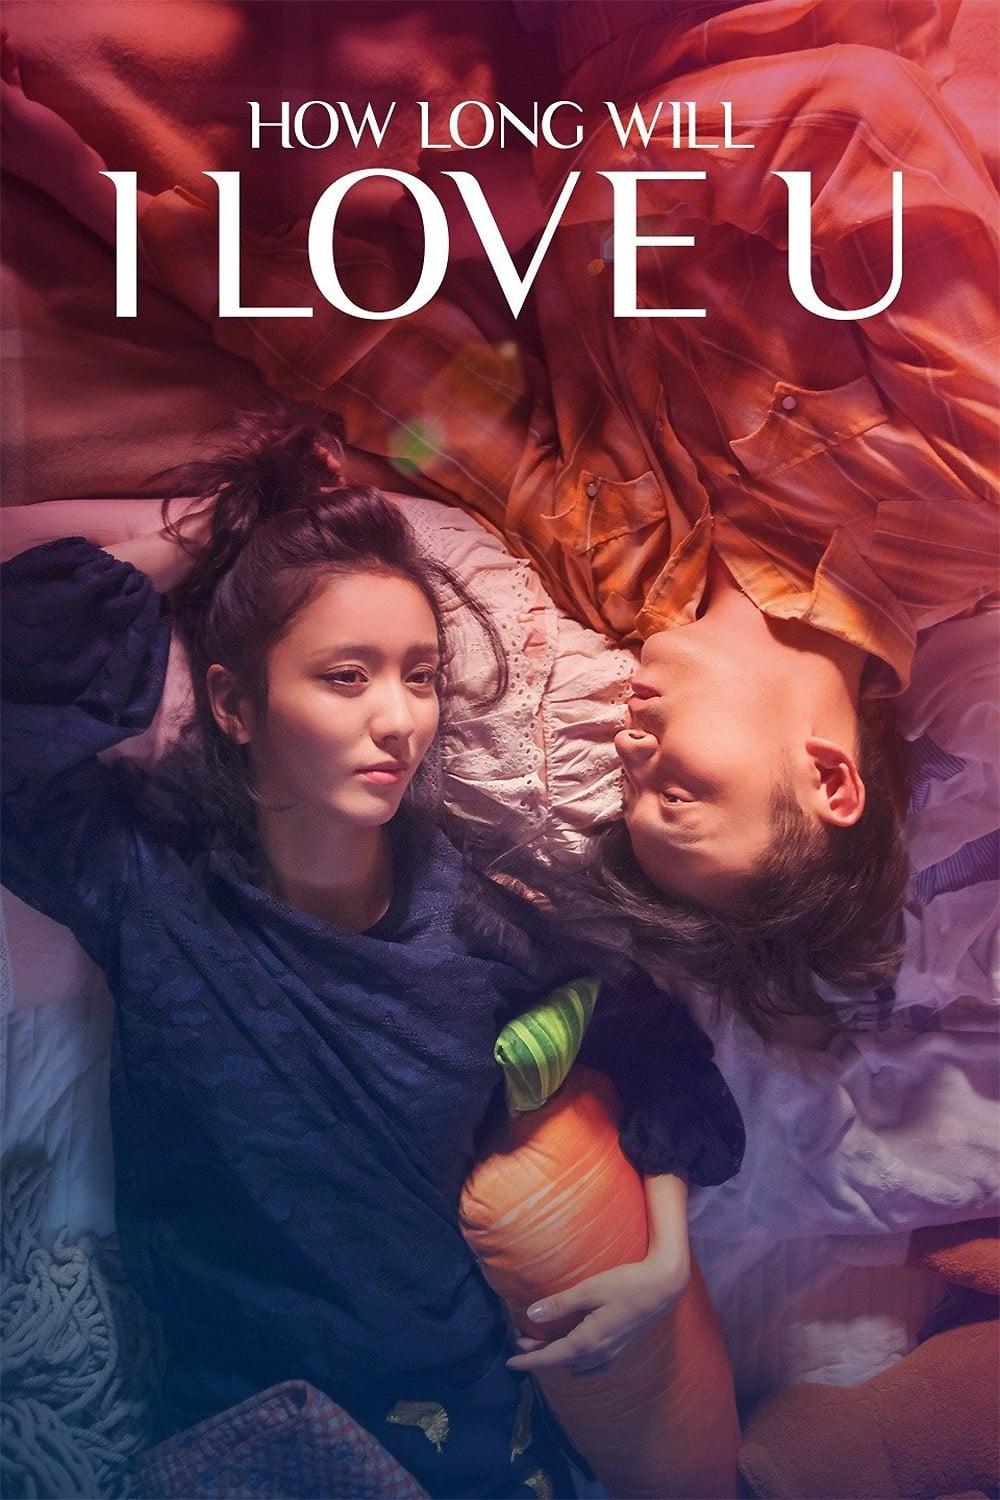 How Long Will I Love U poster